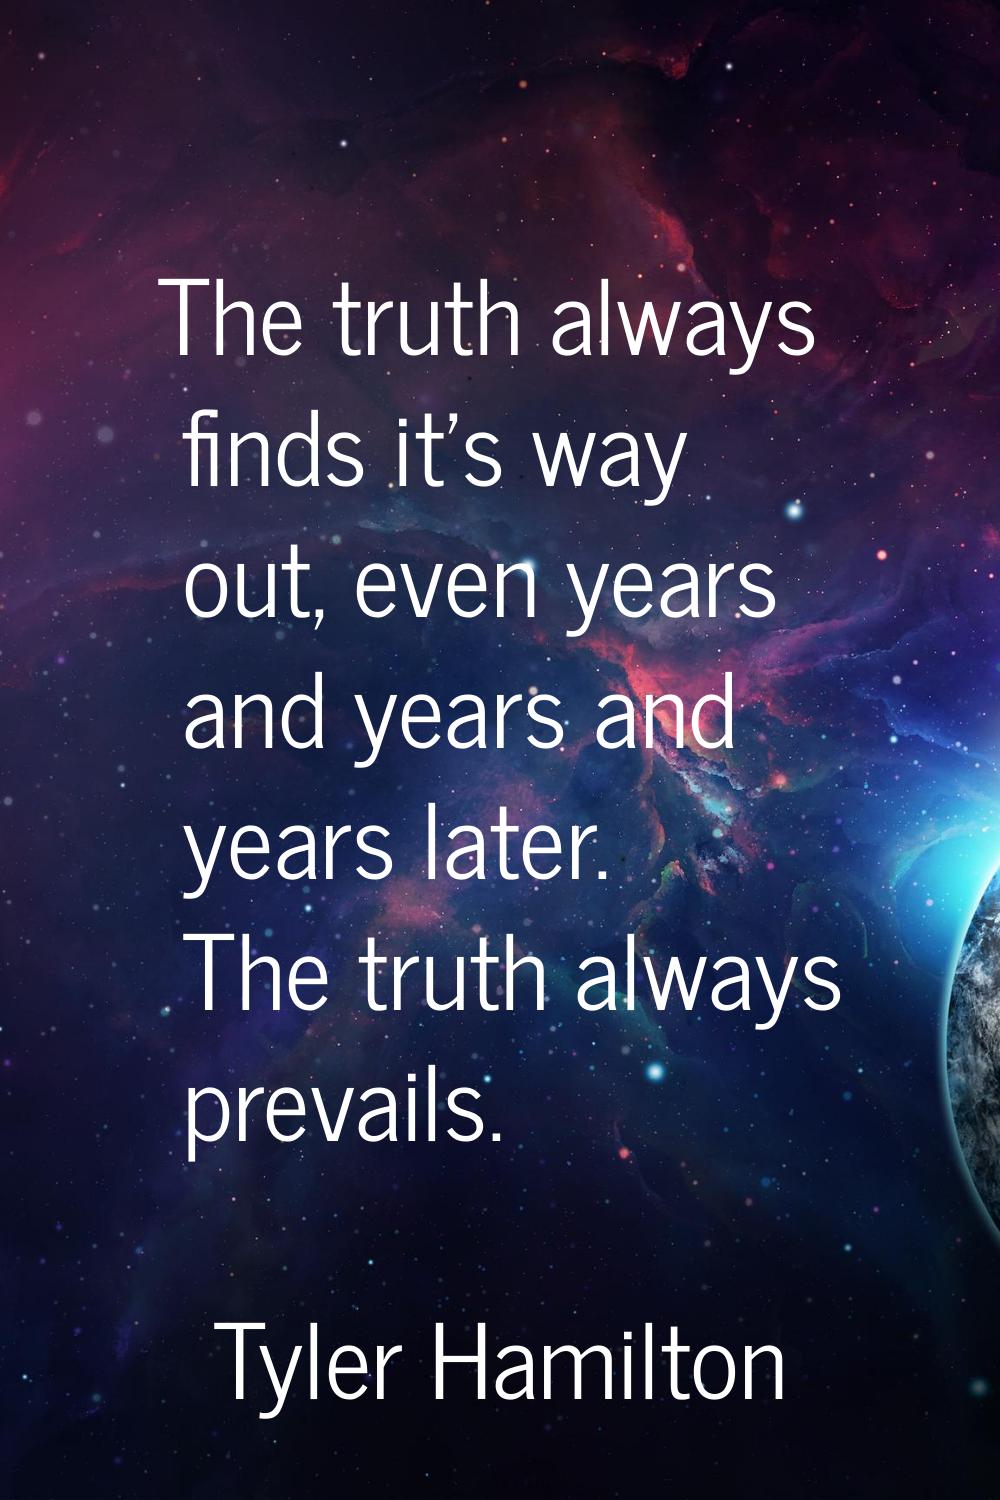 The truth always finds it's way out, even years and years and years later. The truth always prevail